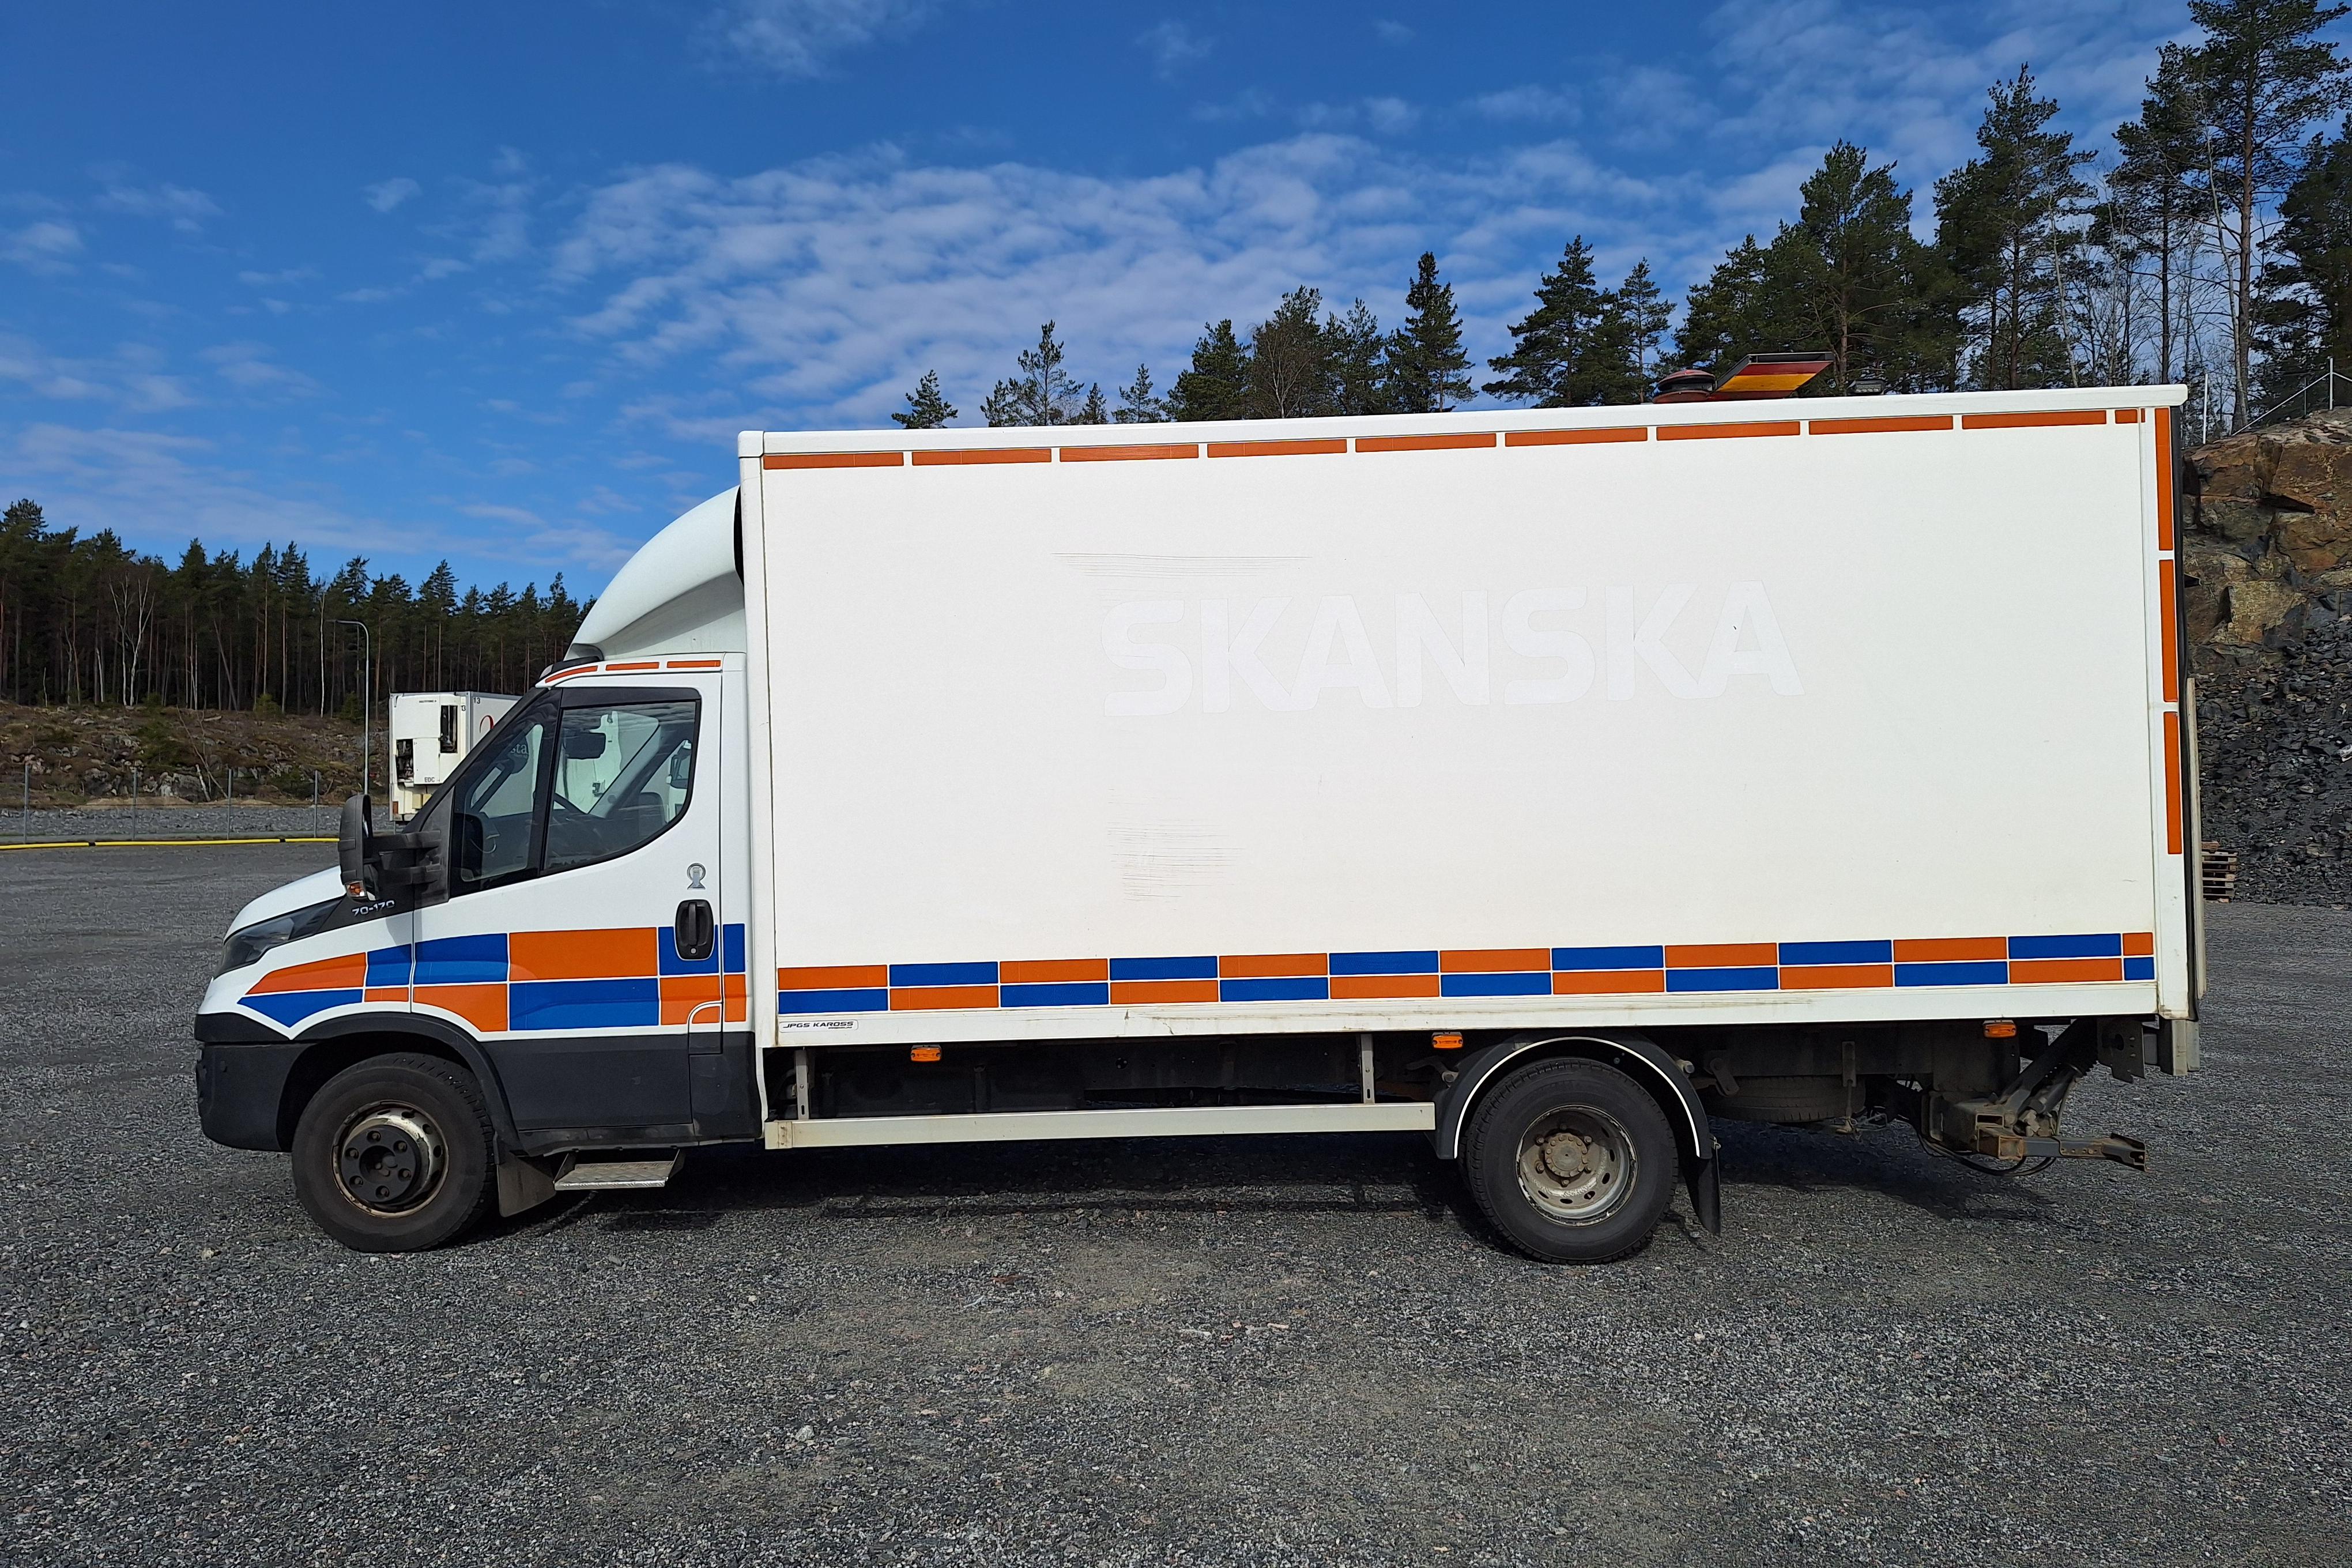 Iveco DAILY 70C17H - 161 950 km - Manual - white - 2015